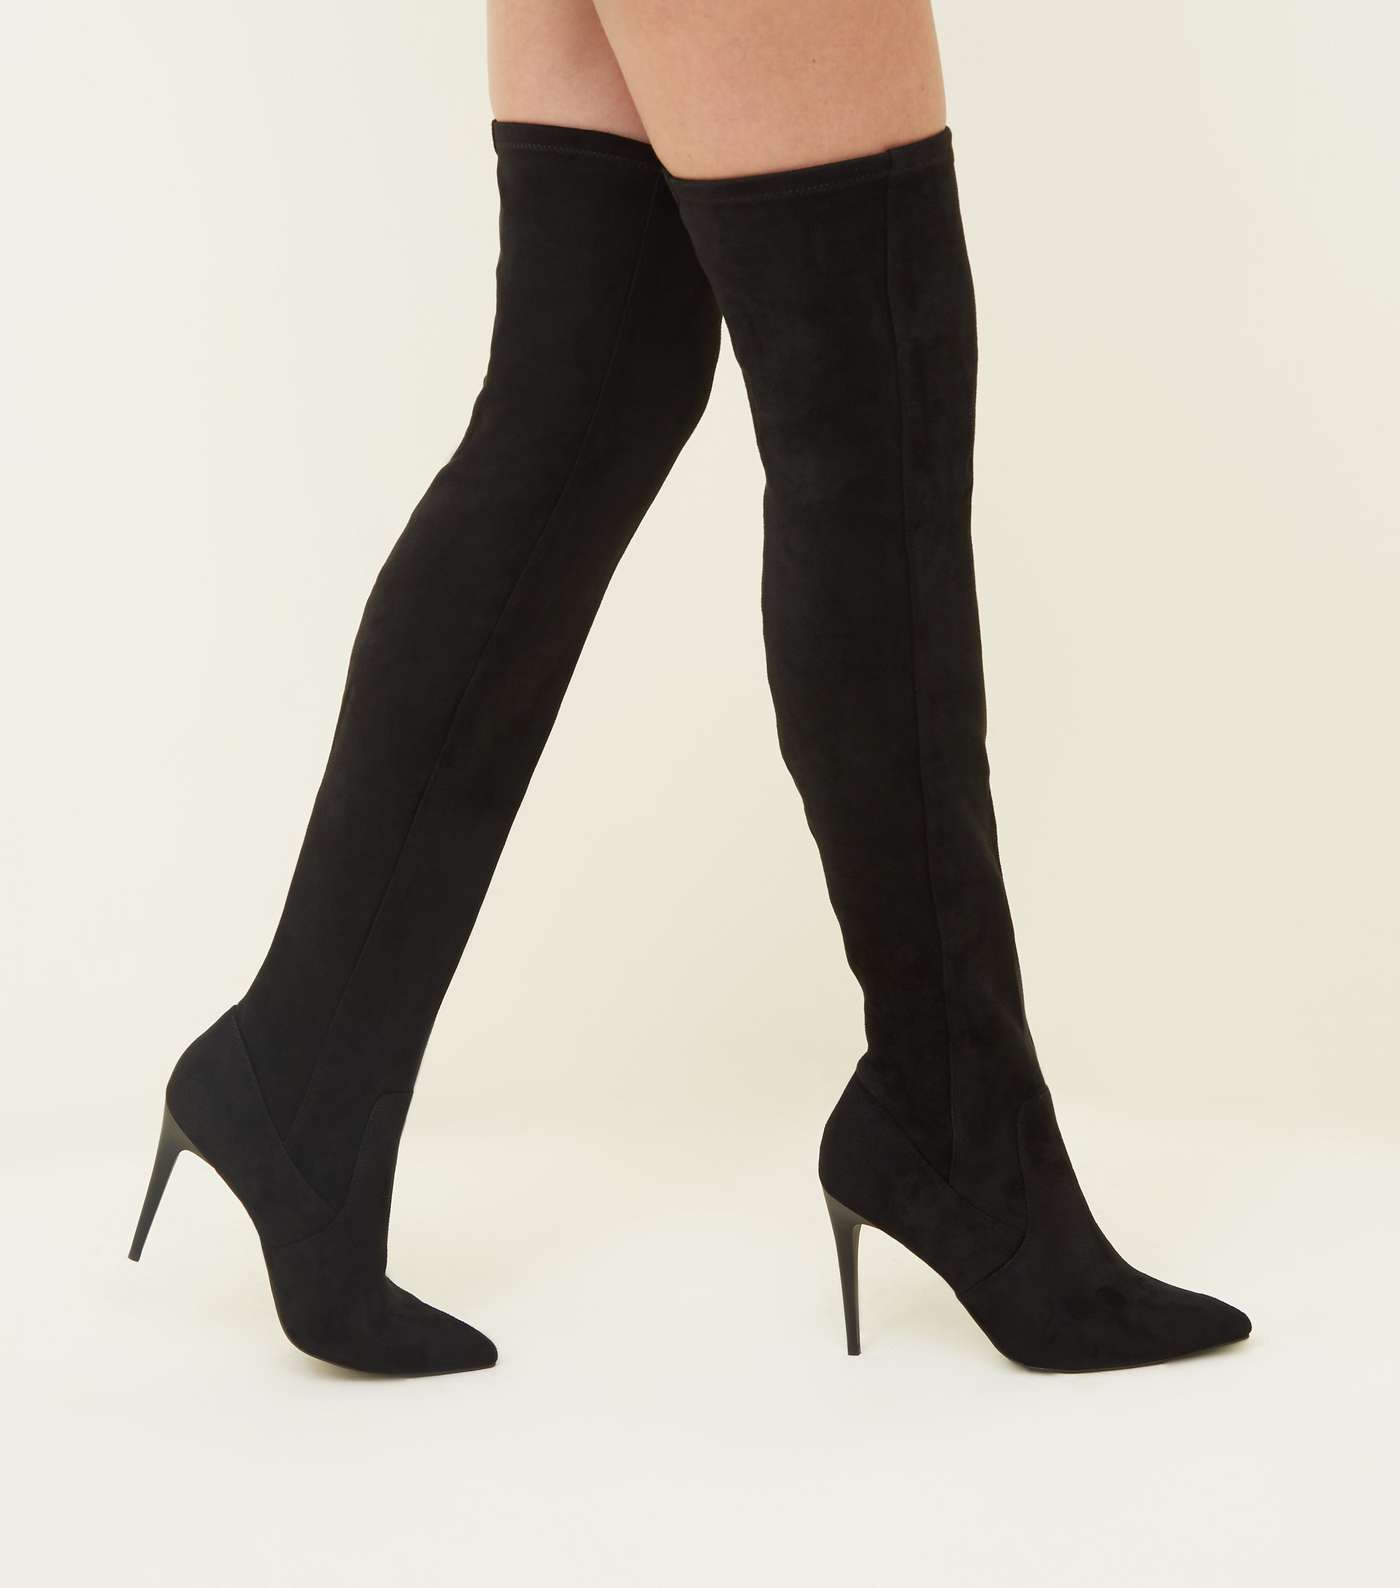 Black Suedette Over-The-Knee Stiletto Boots Image 2